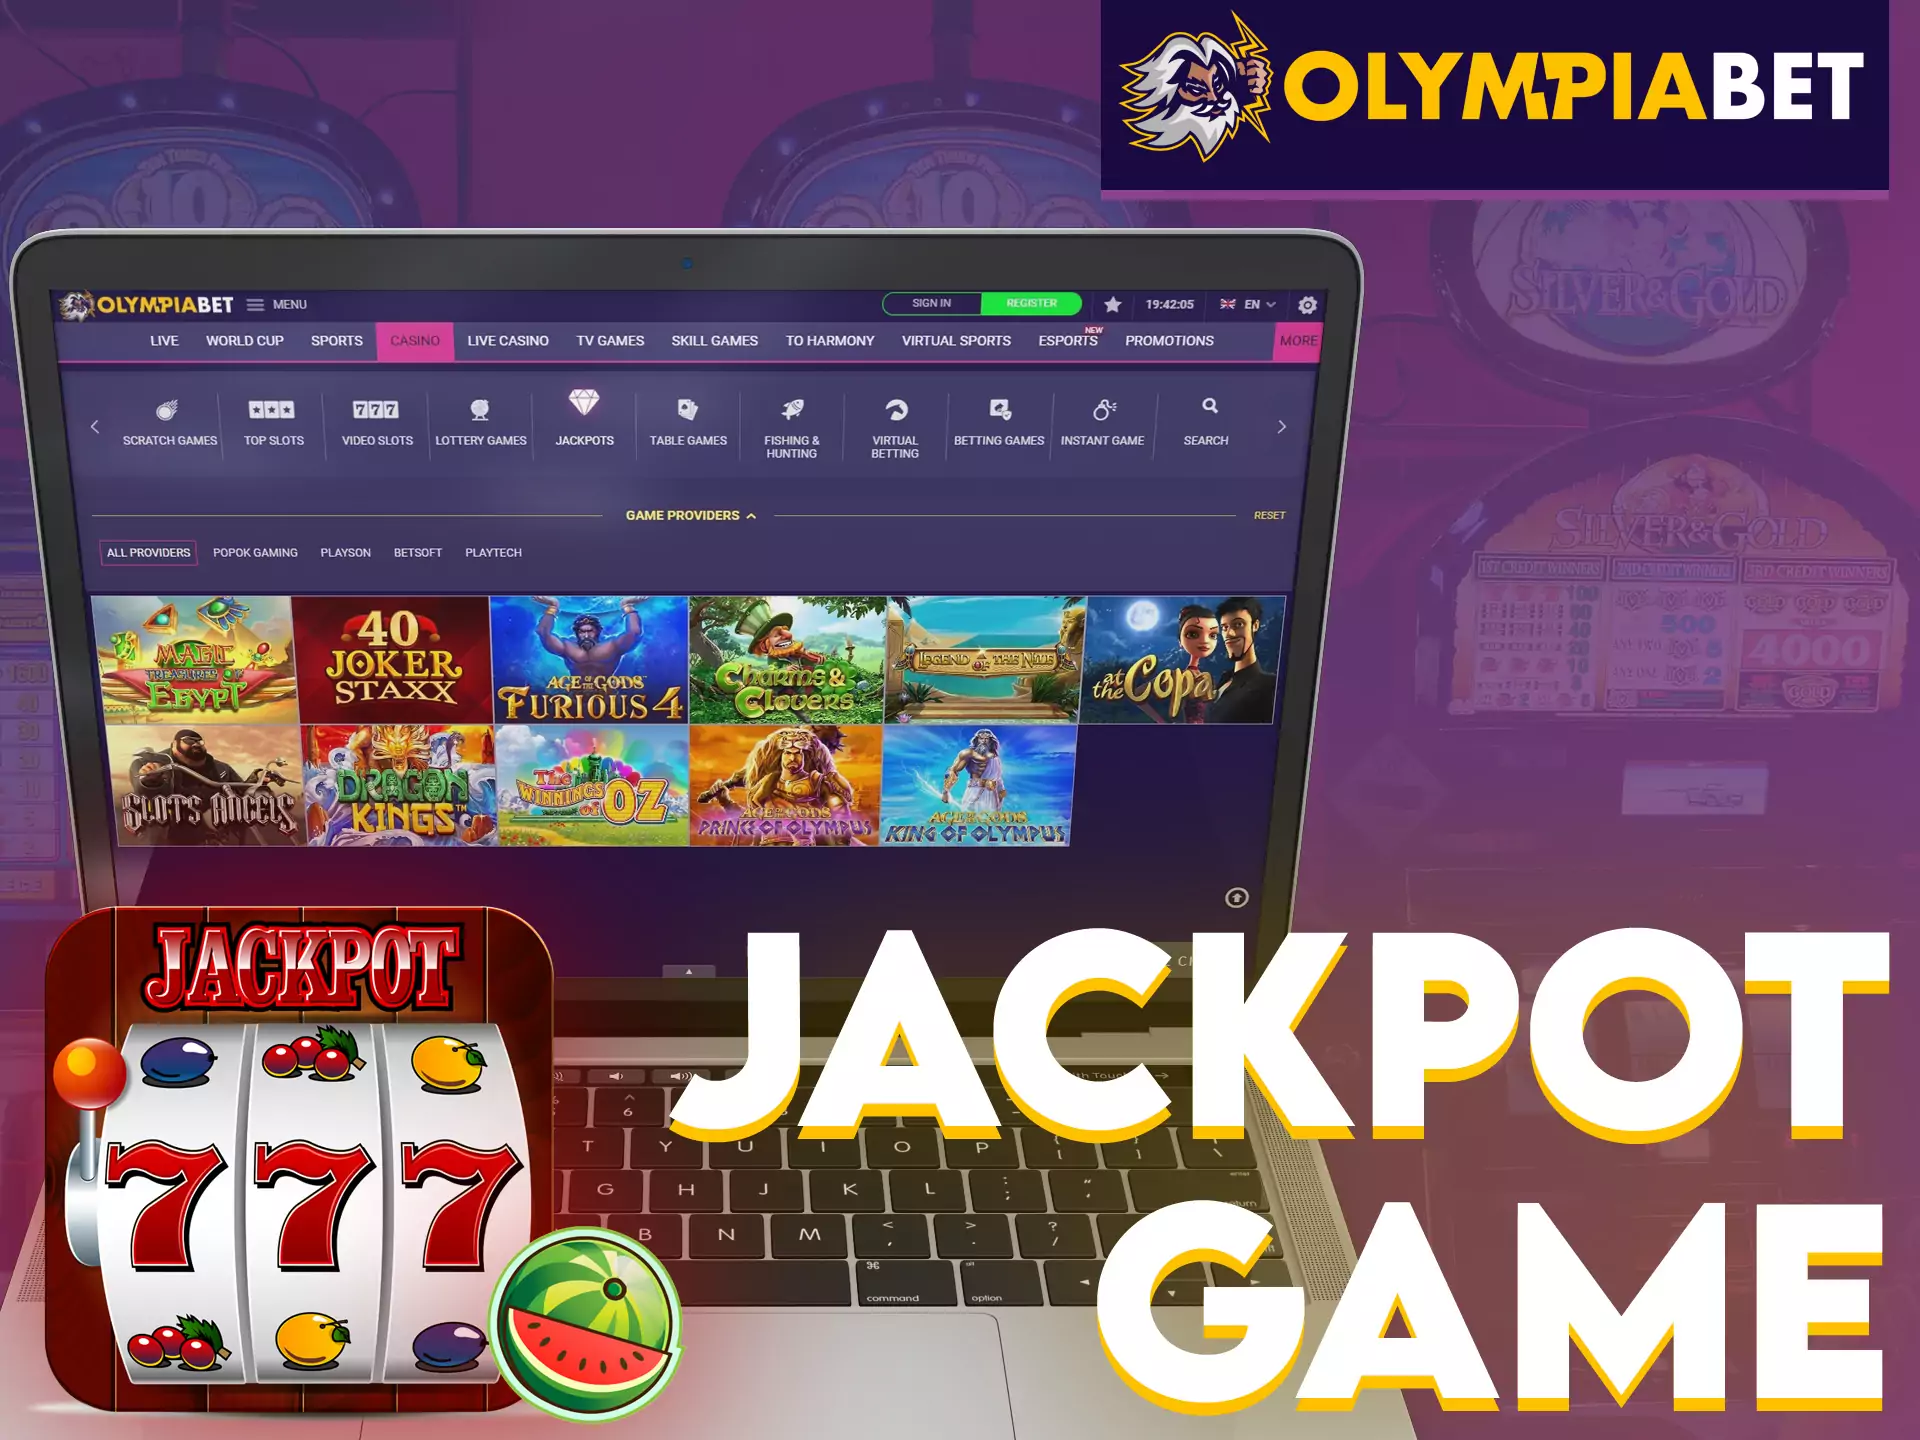 Try your luck on jackpot games at OlympiaBet Casino.